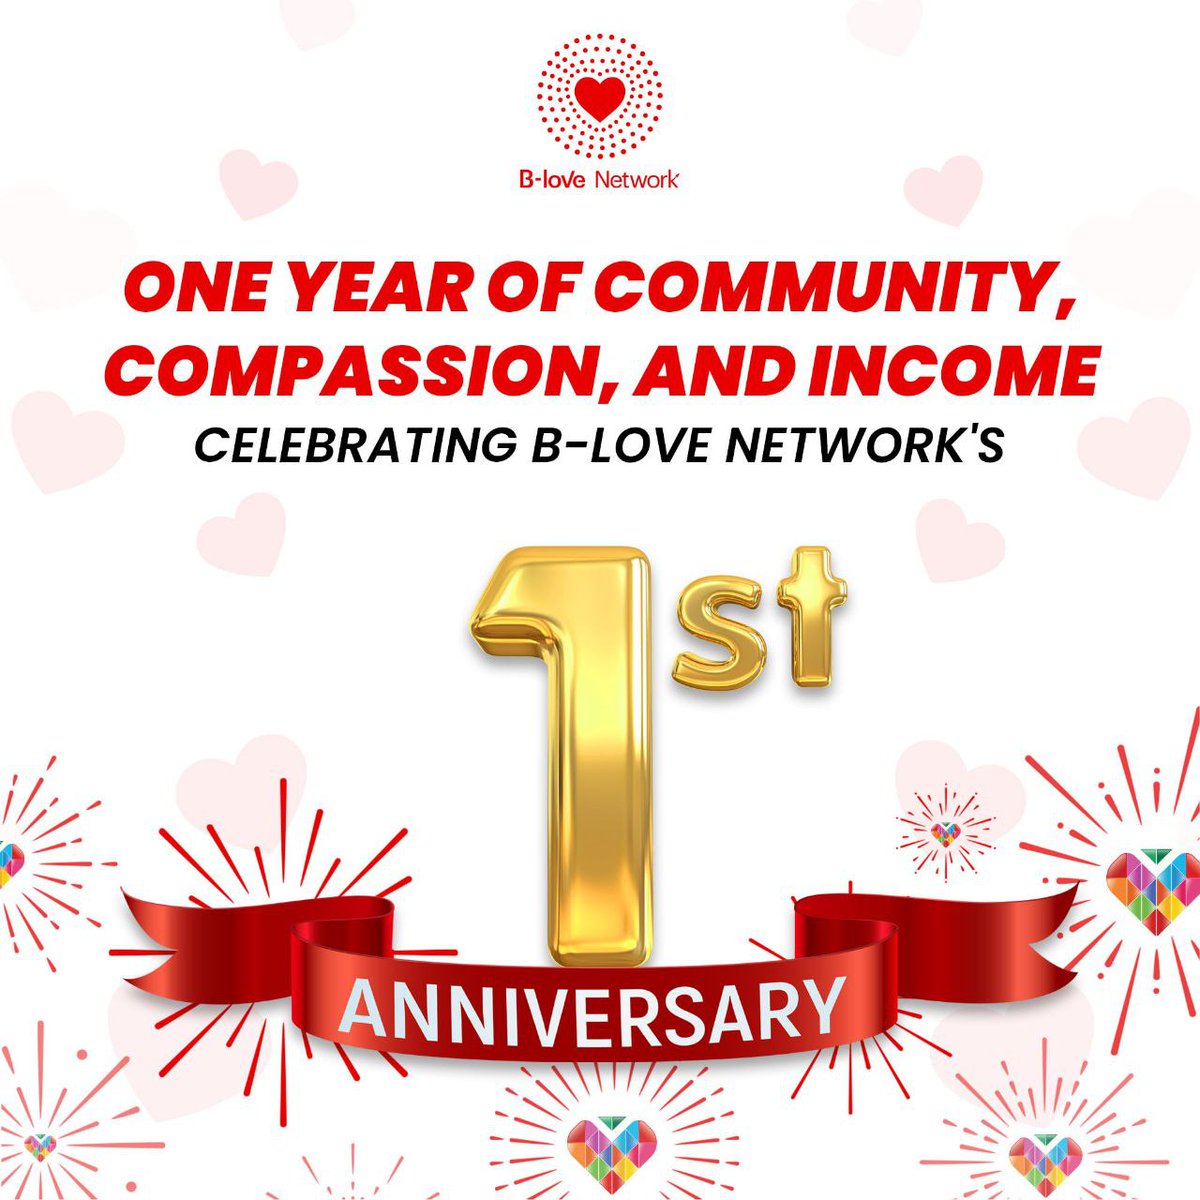 One year of community, compassion, and income celebrating B-Love Network's First Anniversary Looking back on a year filled with community, kindness, and financial success! 🚀 From rich to poor, Young to old, upper to middle class transforming the destiny of all! @BLoveNetwork